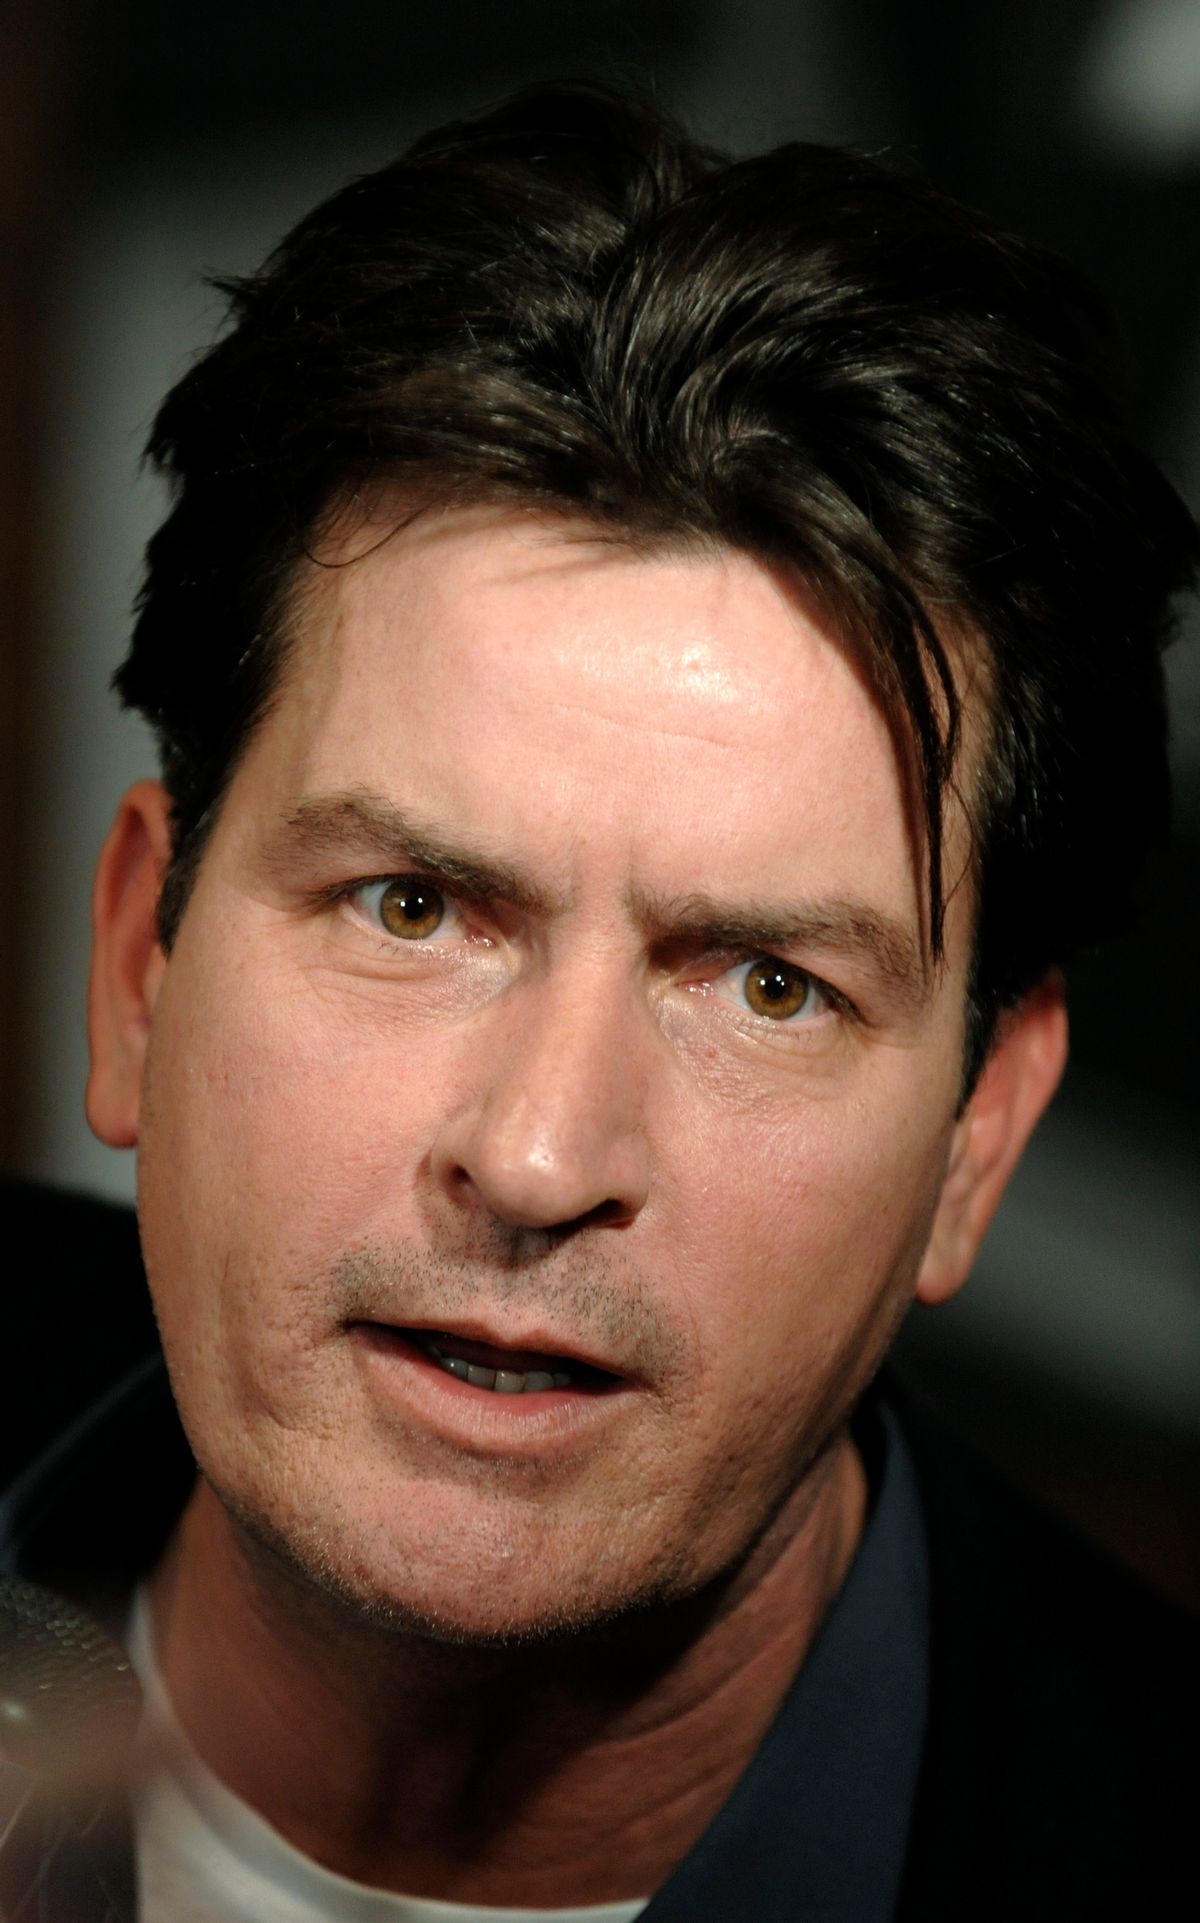 Charlie Sheen is interviewed at an event to celebrate the purchase of restaurant chain Buca di Beppo by Planet Hollywood, at Universal CityWalk in Los Angeles, Wednesday, Jan. 28, 2009. (AP Photo/Chris Pizzello) (Chris Pizzello)